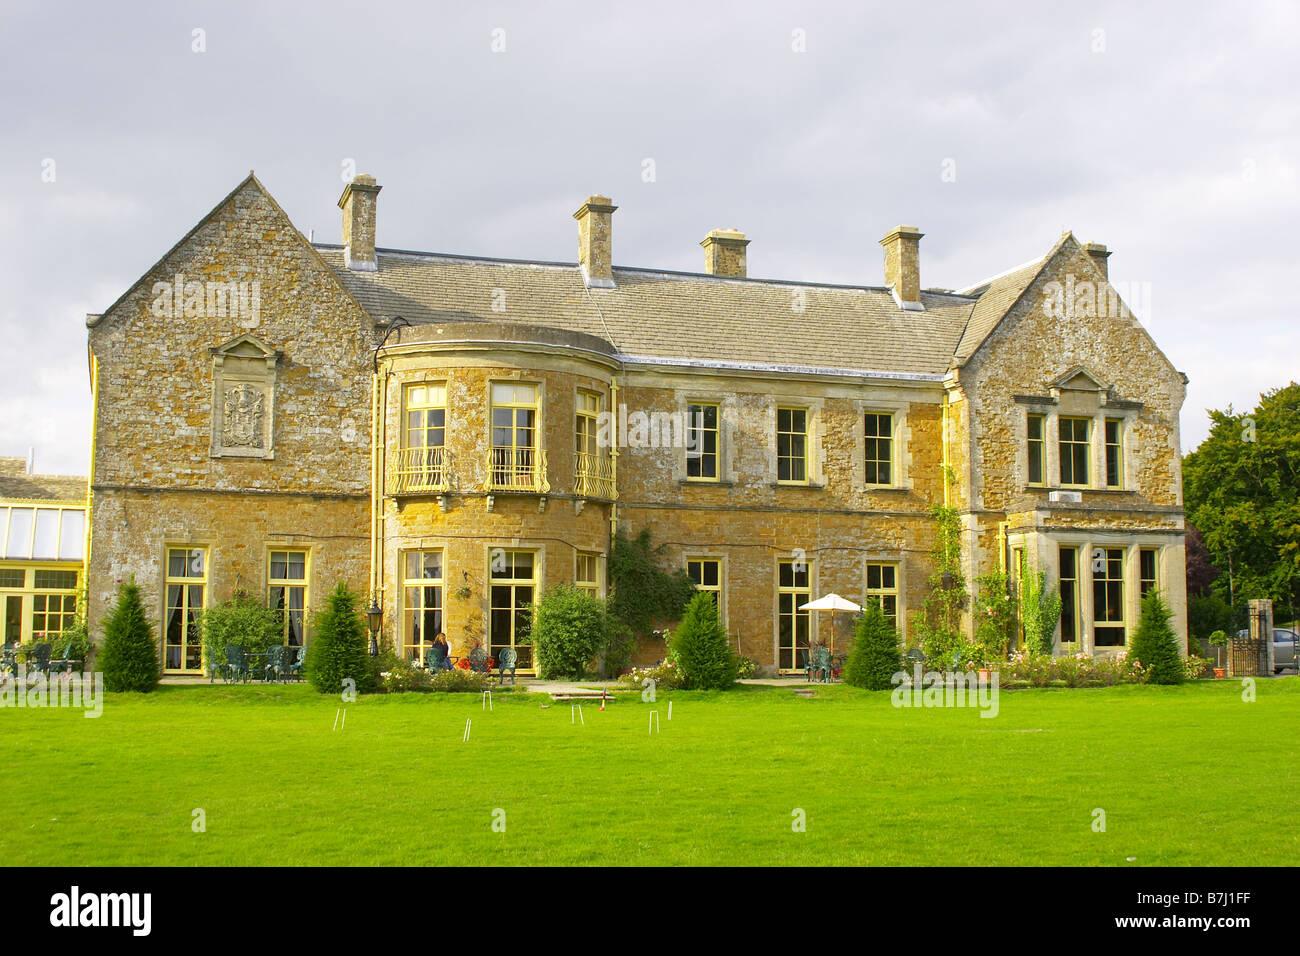 Cotswolds Country Manor House, Stow on the Wold, Gloustershire, England Stock Photo